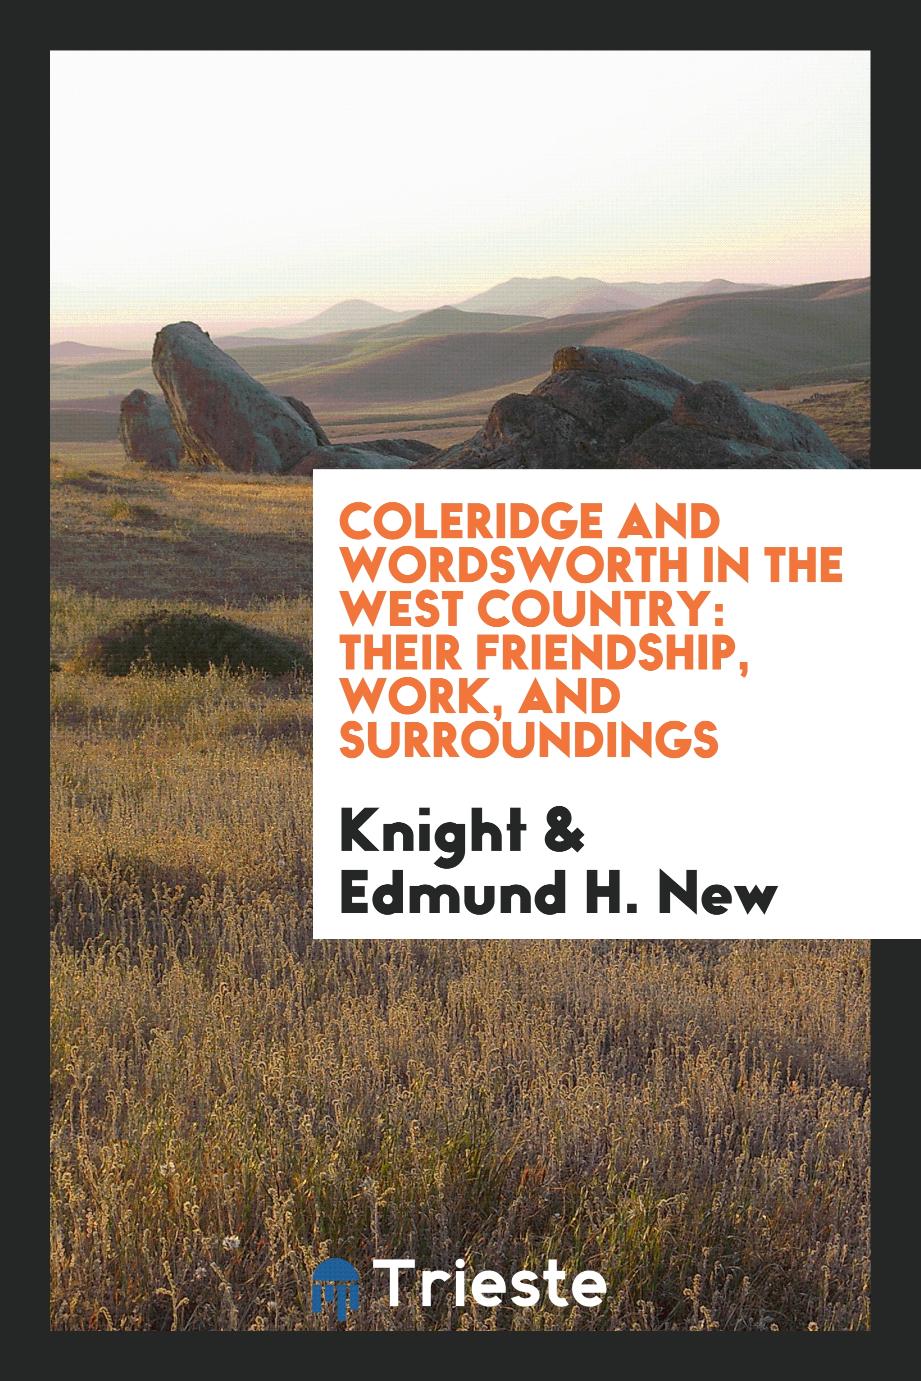 Coleridge and Wordsworth in the West country: their friendship, work, and surroundings